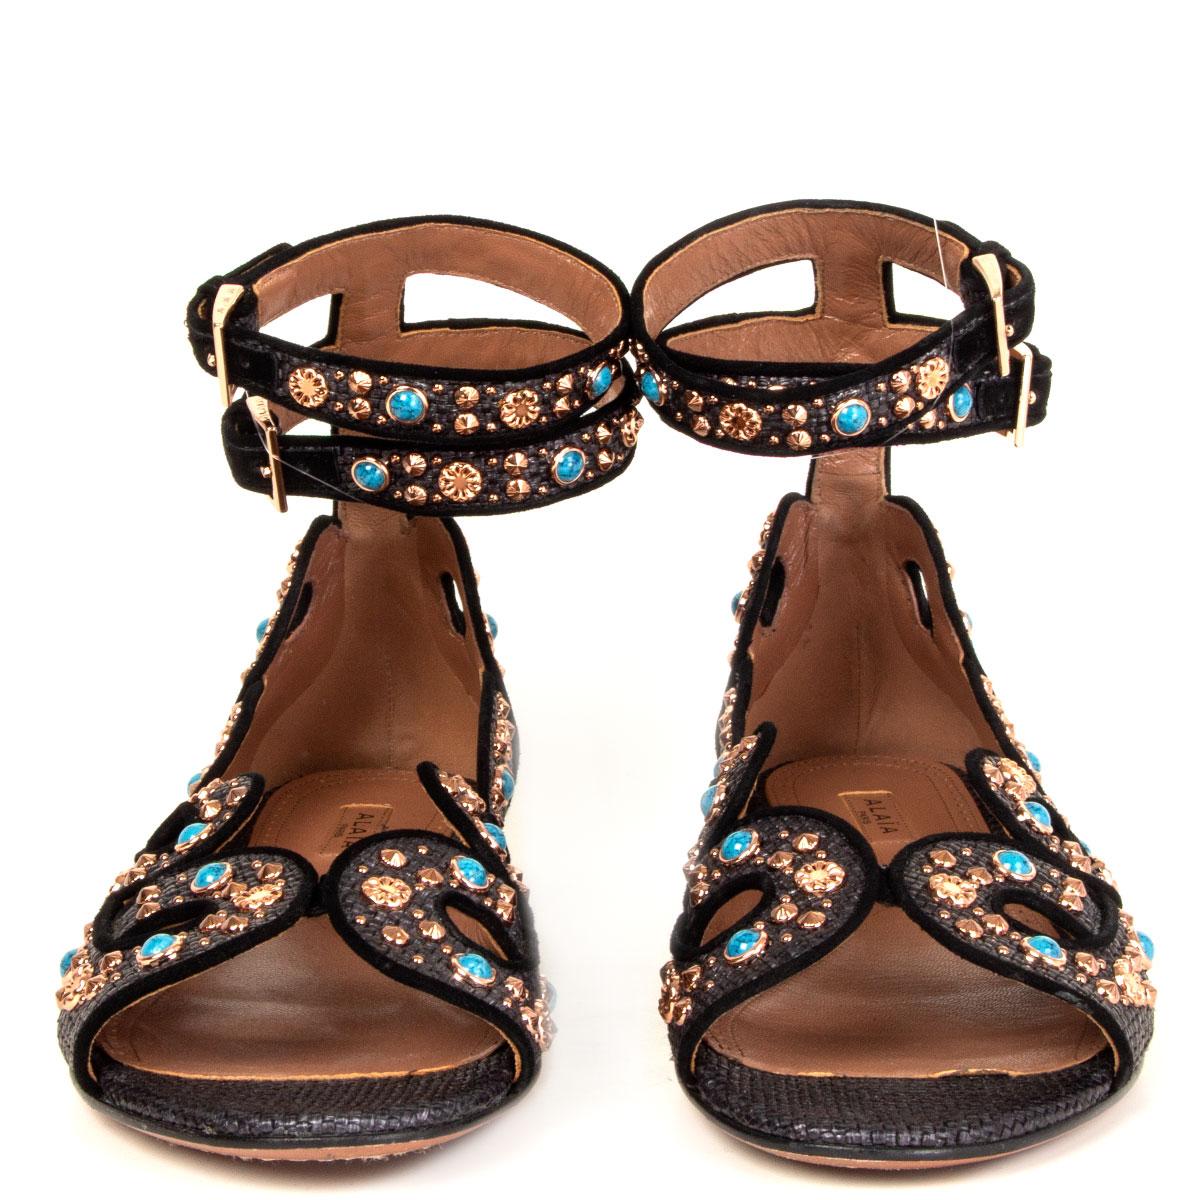 100% authentic Alaïa ankle-strap flats in black raffia with tan leather lining embellished with rose-gold metal studs and round turquoise stones. Have been worn once and are in excellent condition. Come with dust bag. 

Measurements
Imprinted